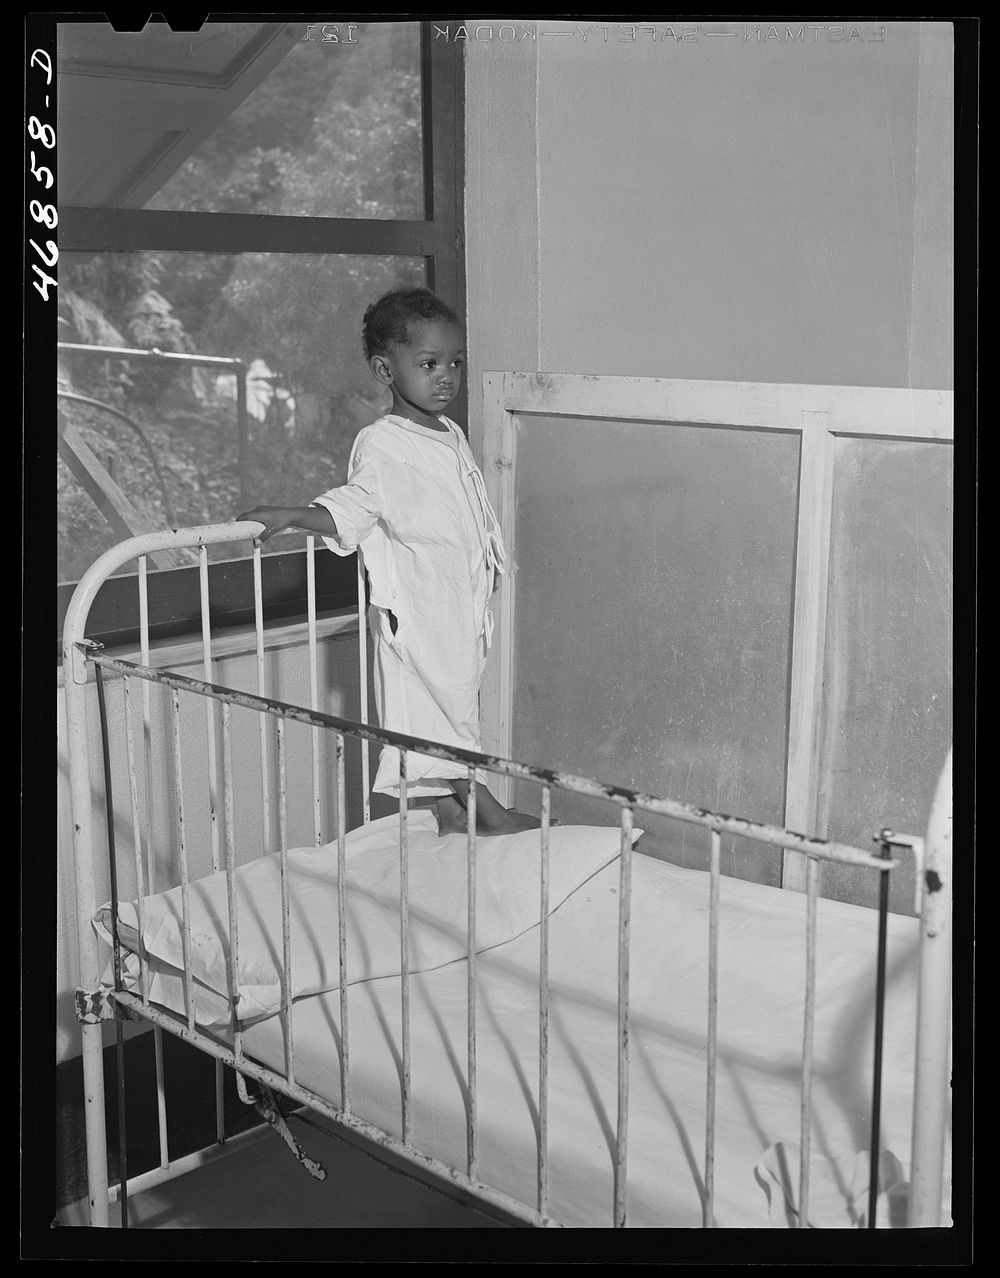 Christiansted, Saint Croix Island, Virgin Islands. In the children's ward at Christiansted hospital. Sourced from the…